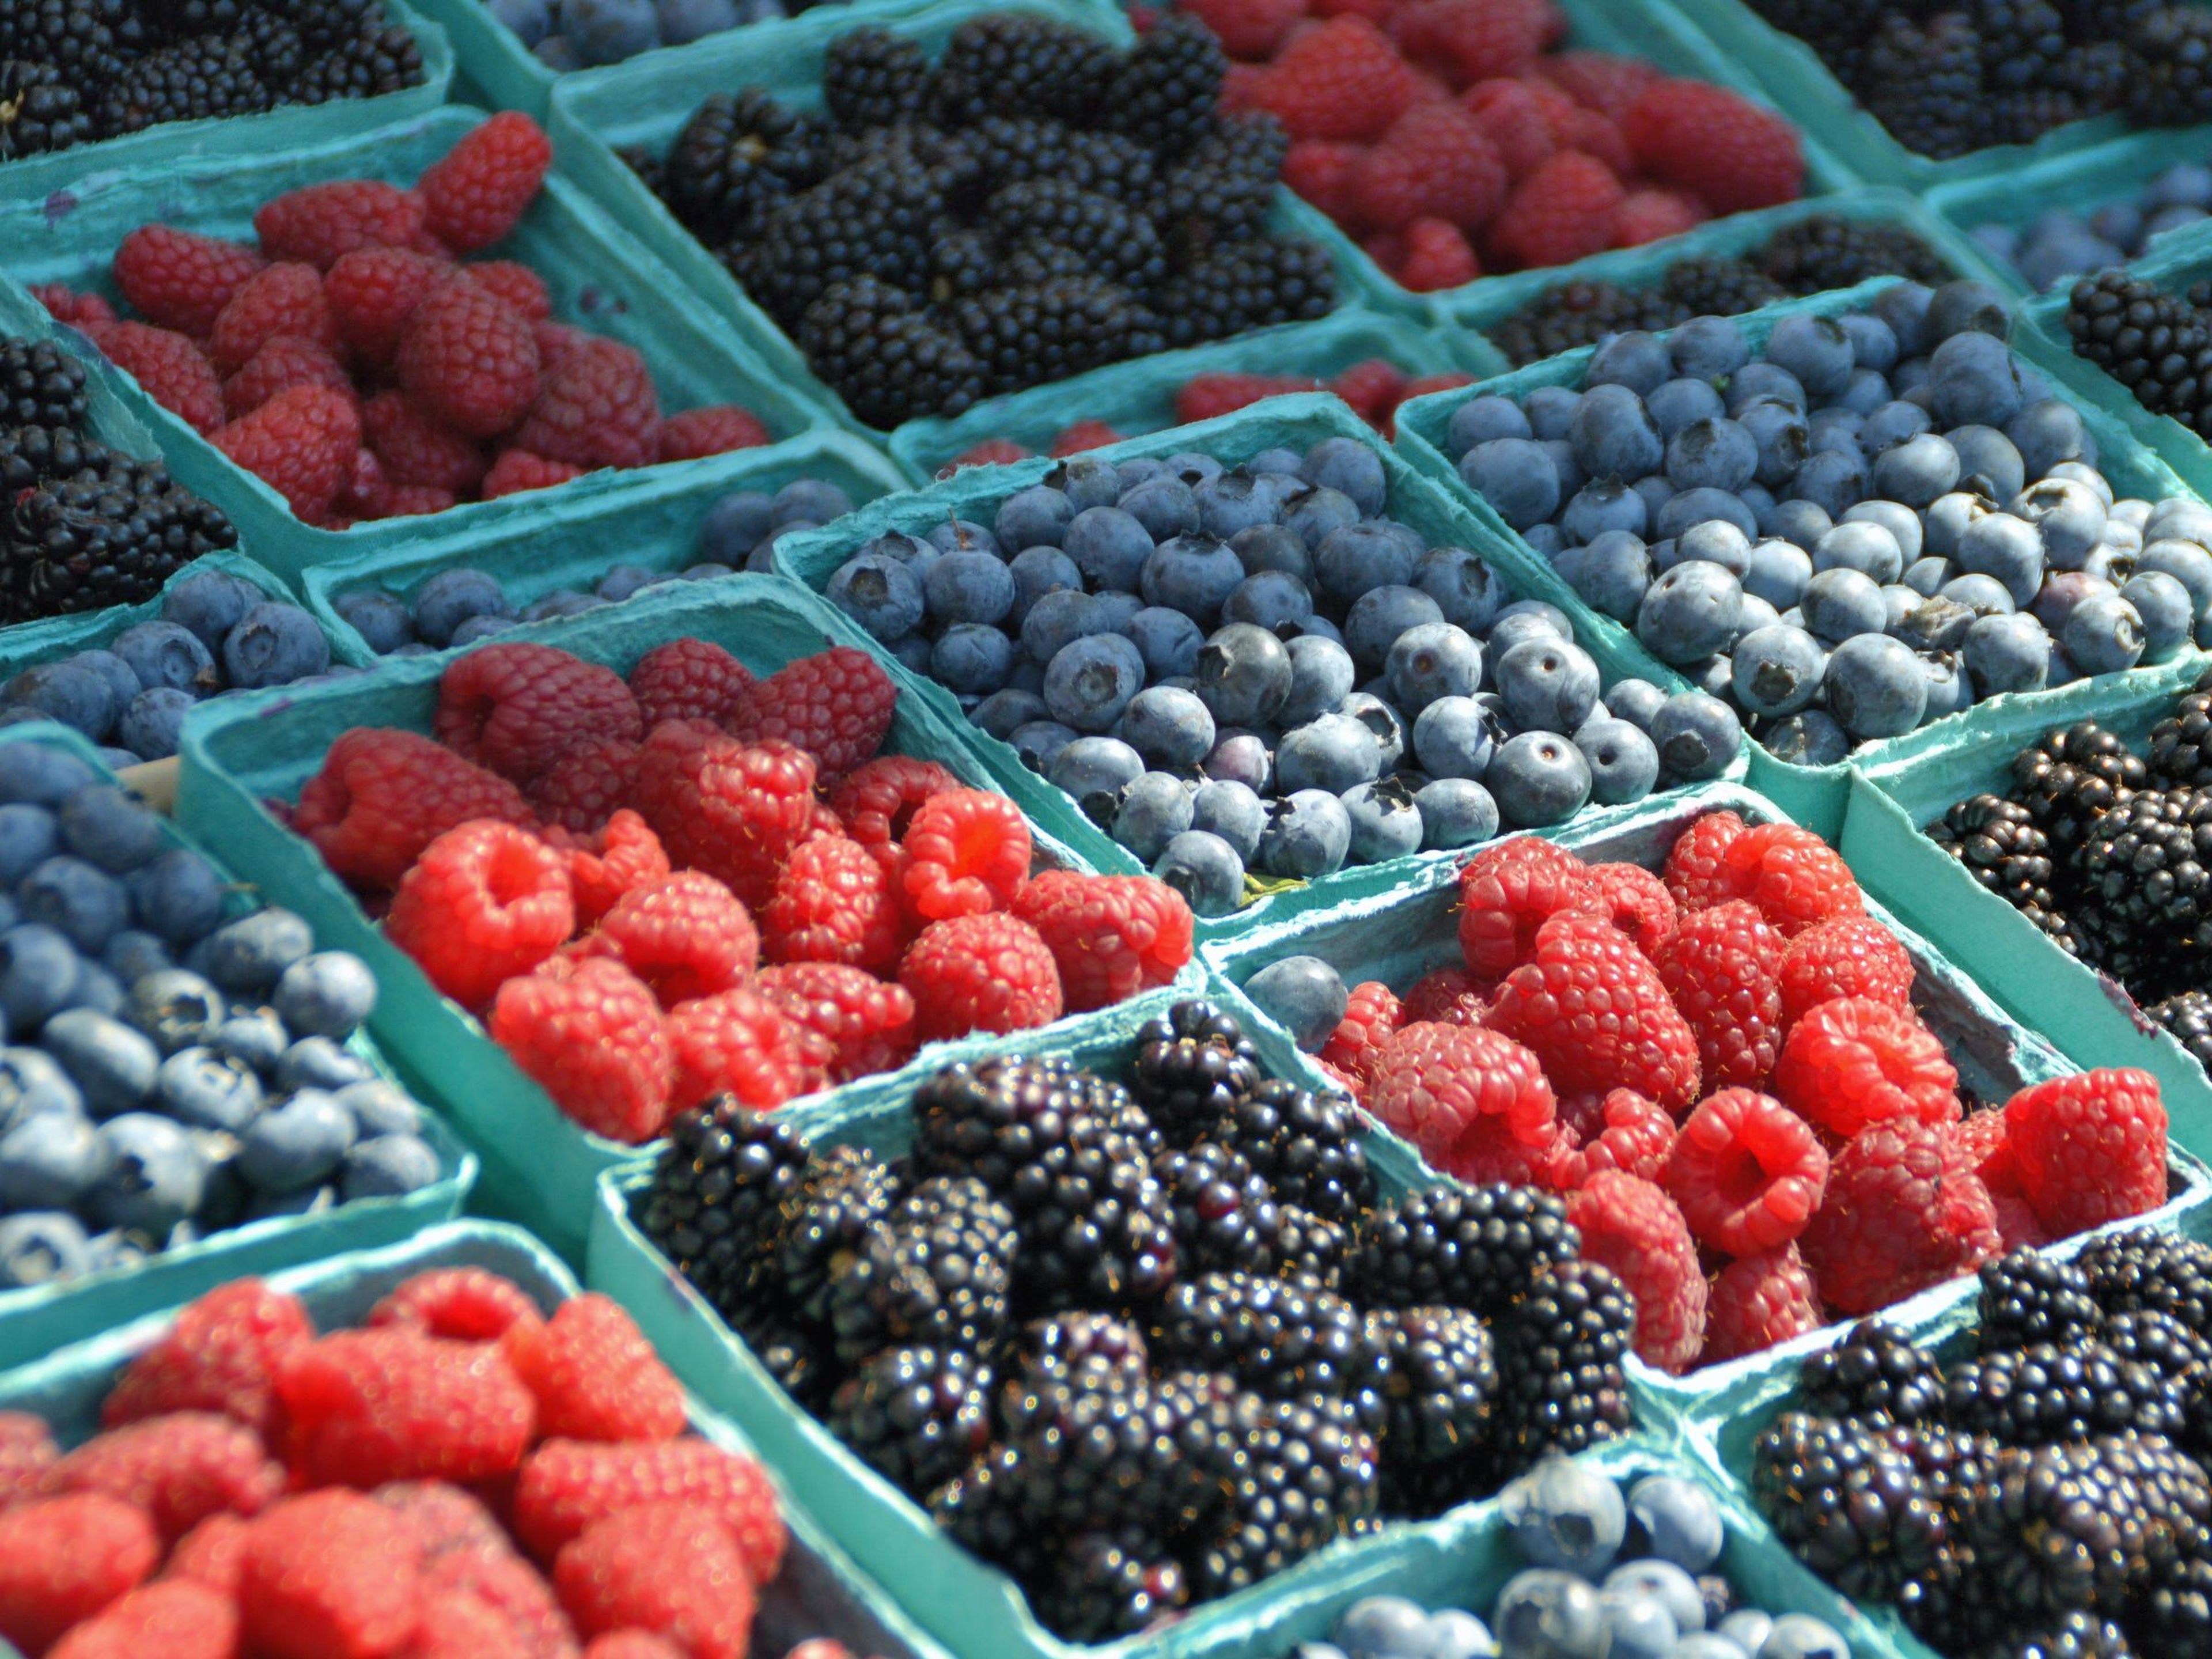 Berries can last longer than you think.